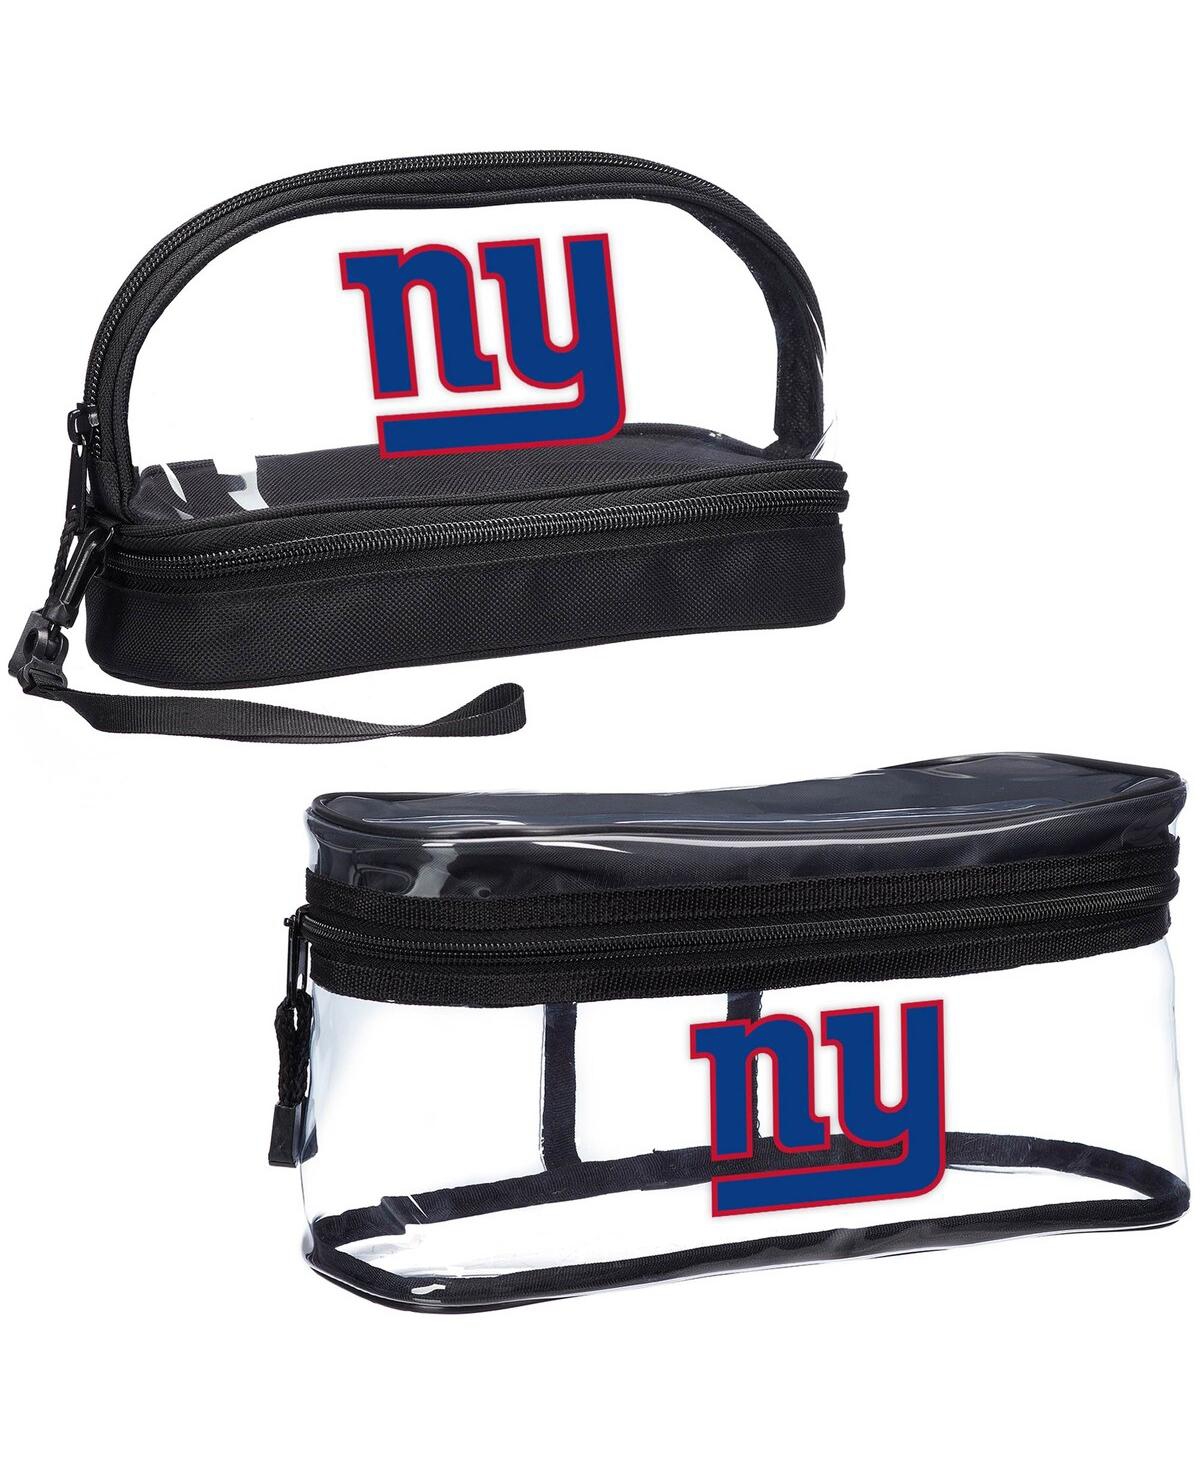 Men's and Women's The Northwest Company New York Giants Two-Piece Travel Set - Black